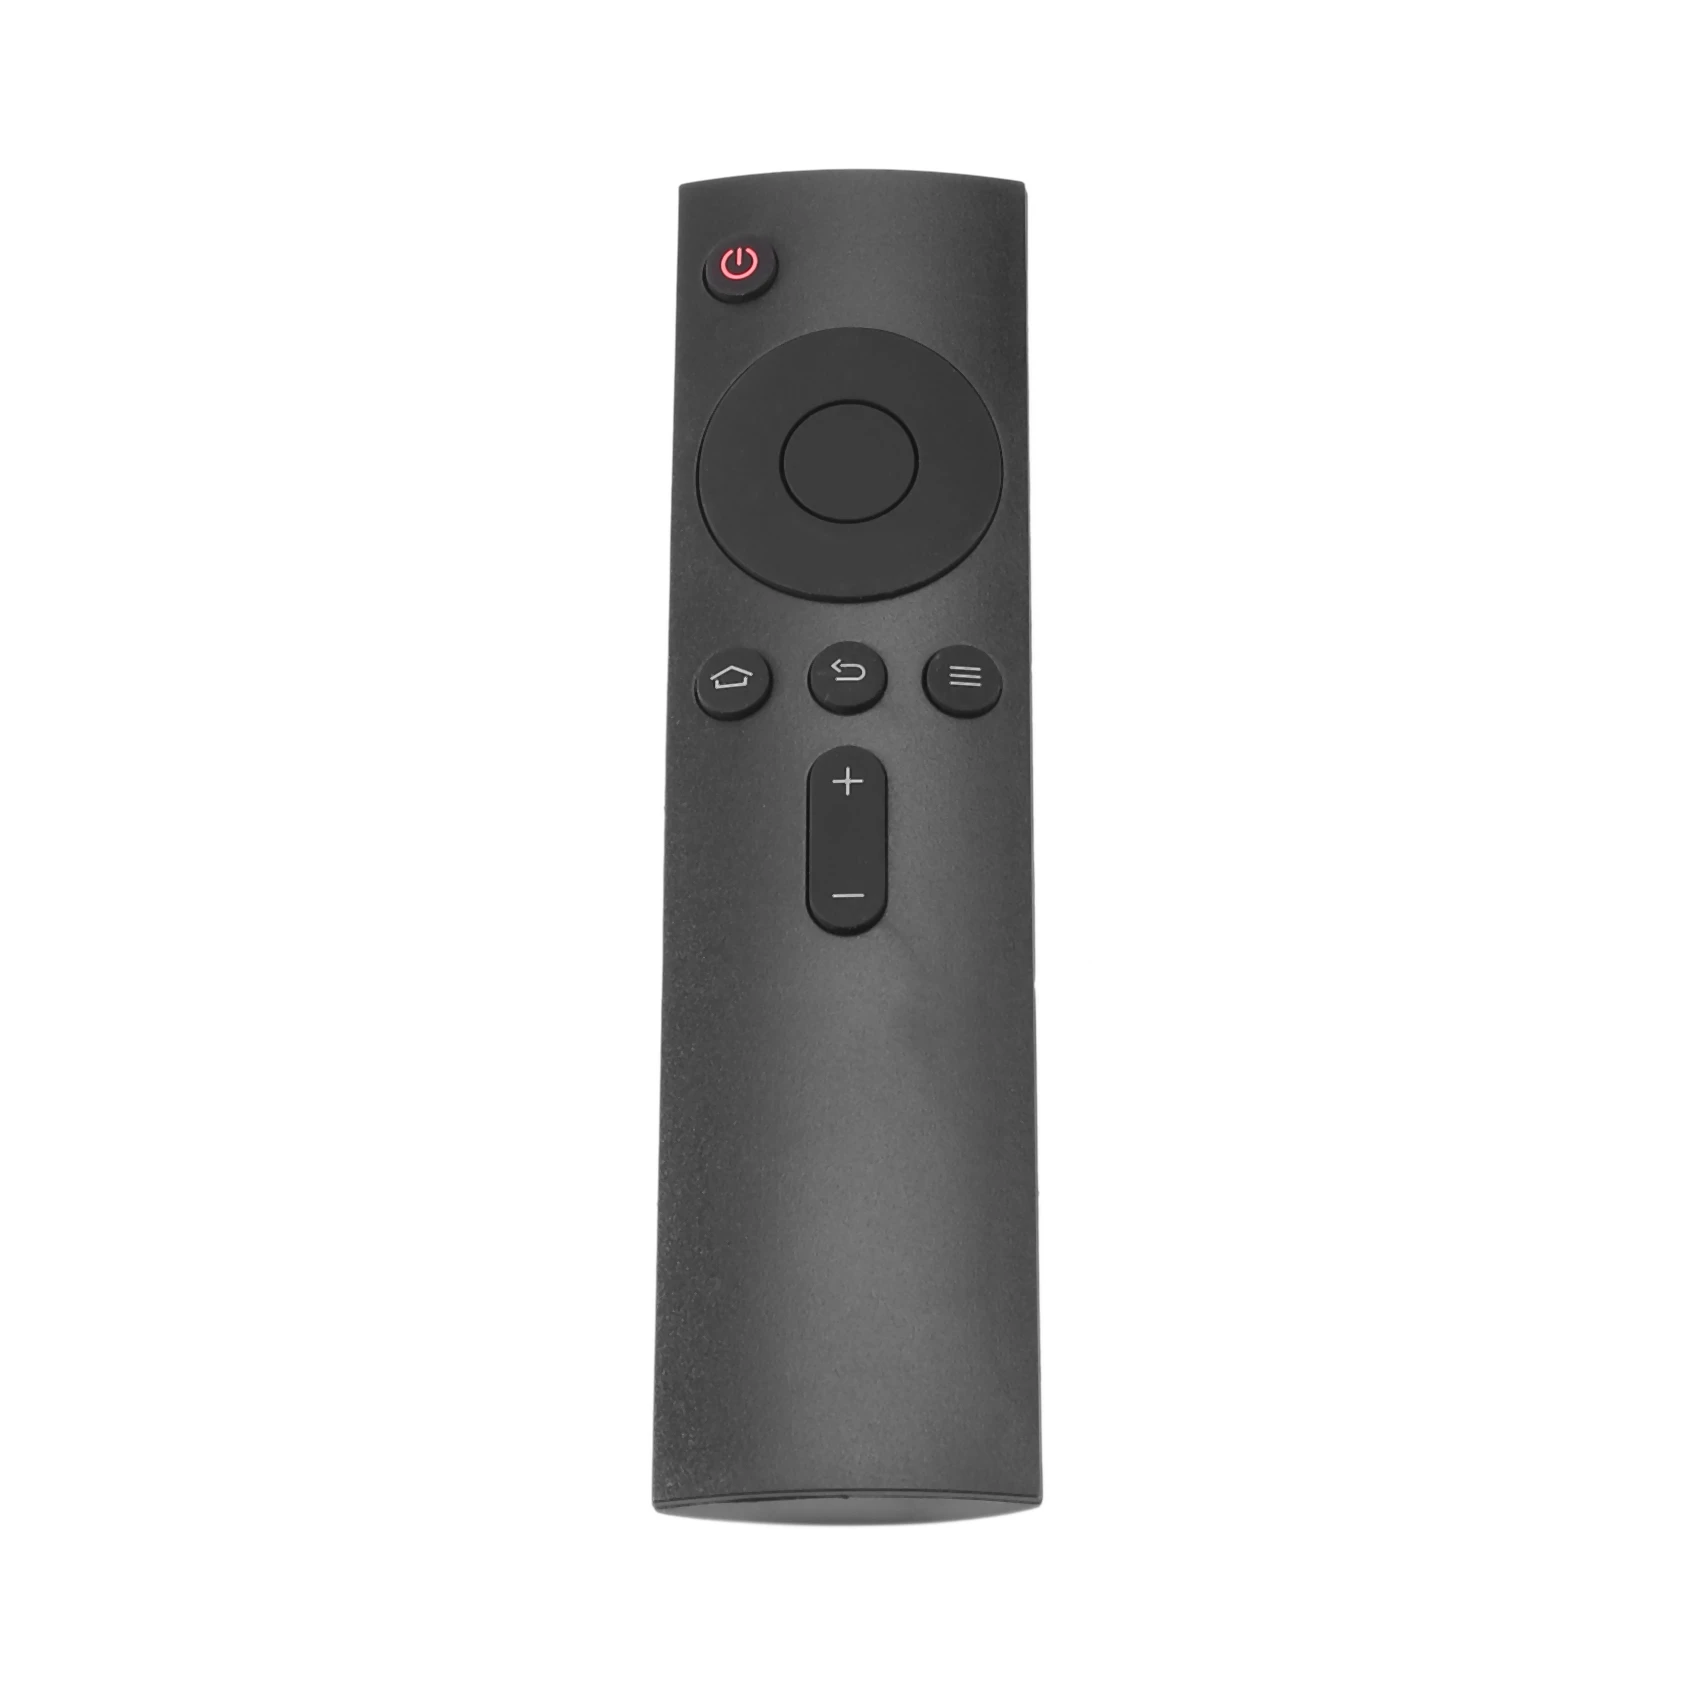 New Replacement XMRM-006 XMRM-OOA Remote Control for Xiao-Mi Mi TV 4S Without Voice Bluetooth Remote Control